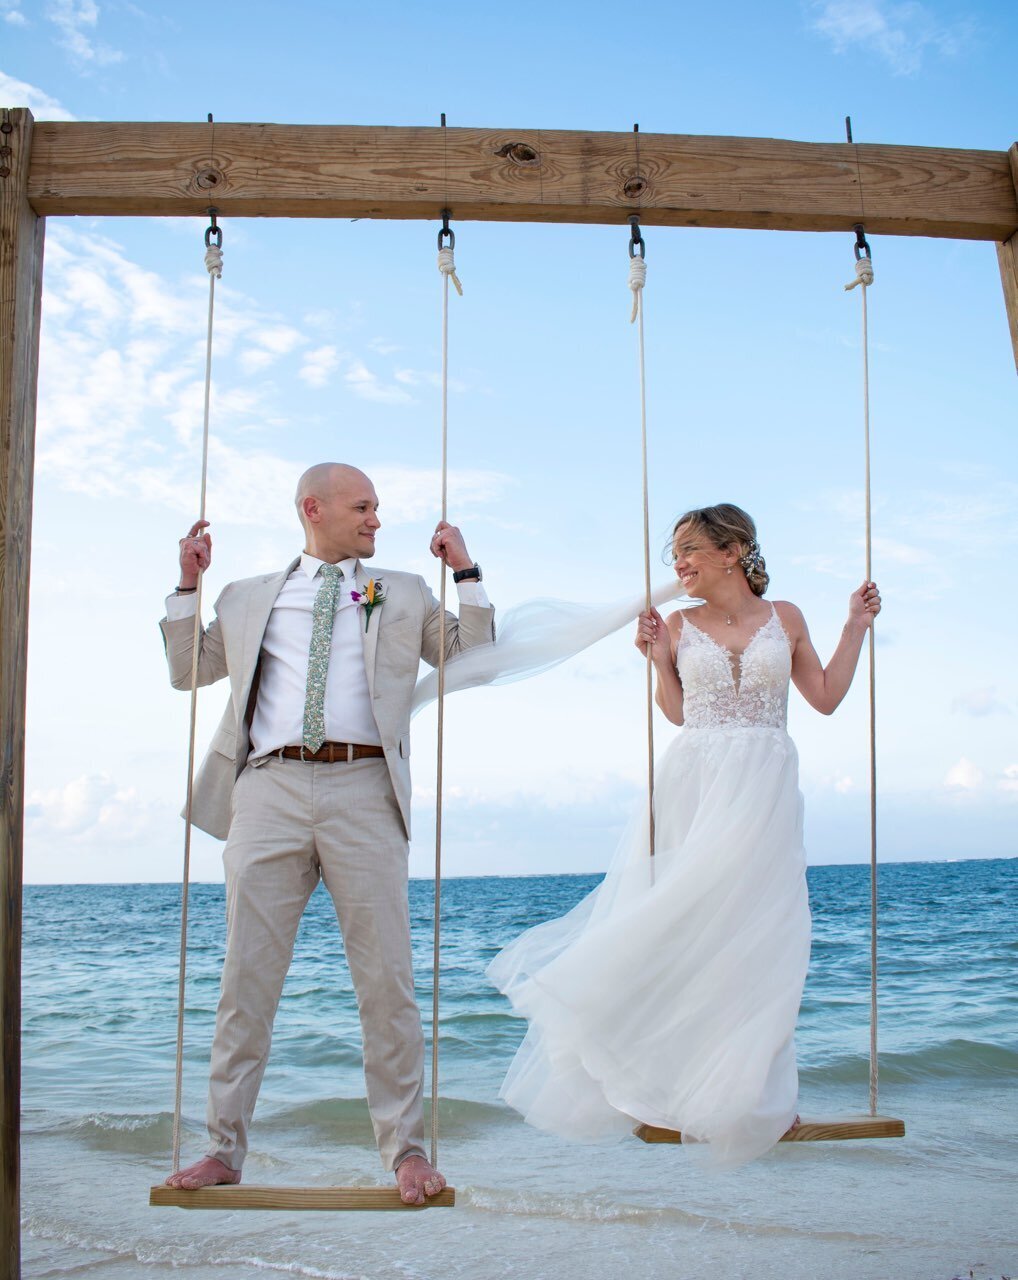 Bride and groom are standing on swings with the ocean in the background, looking at each other